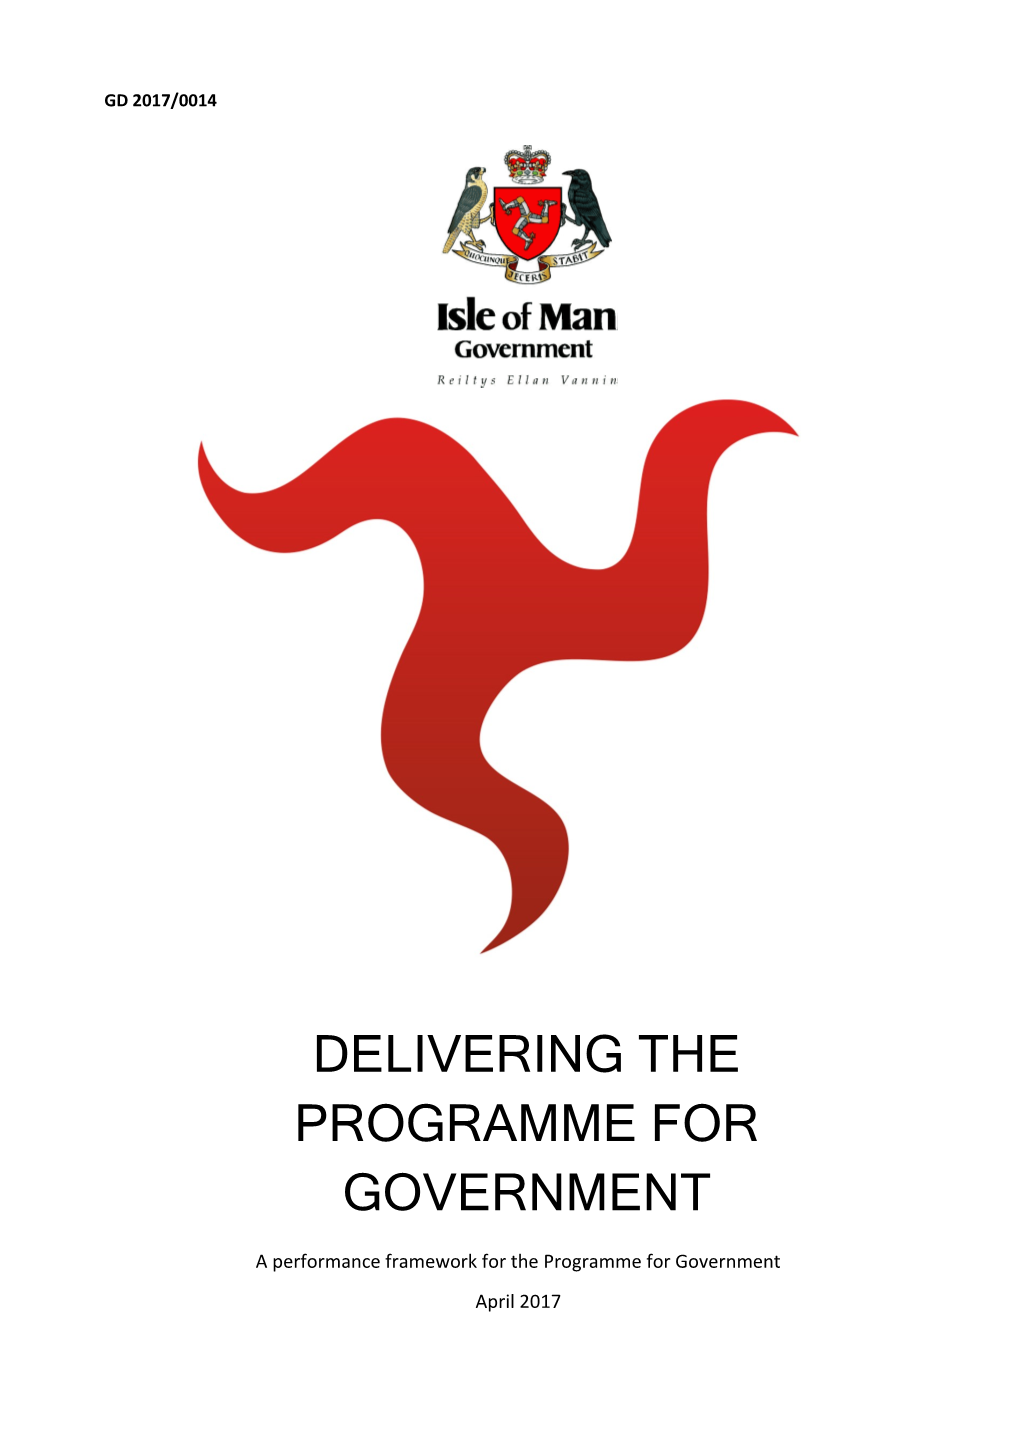 Delivering the Programme for Government